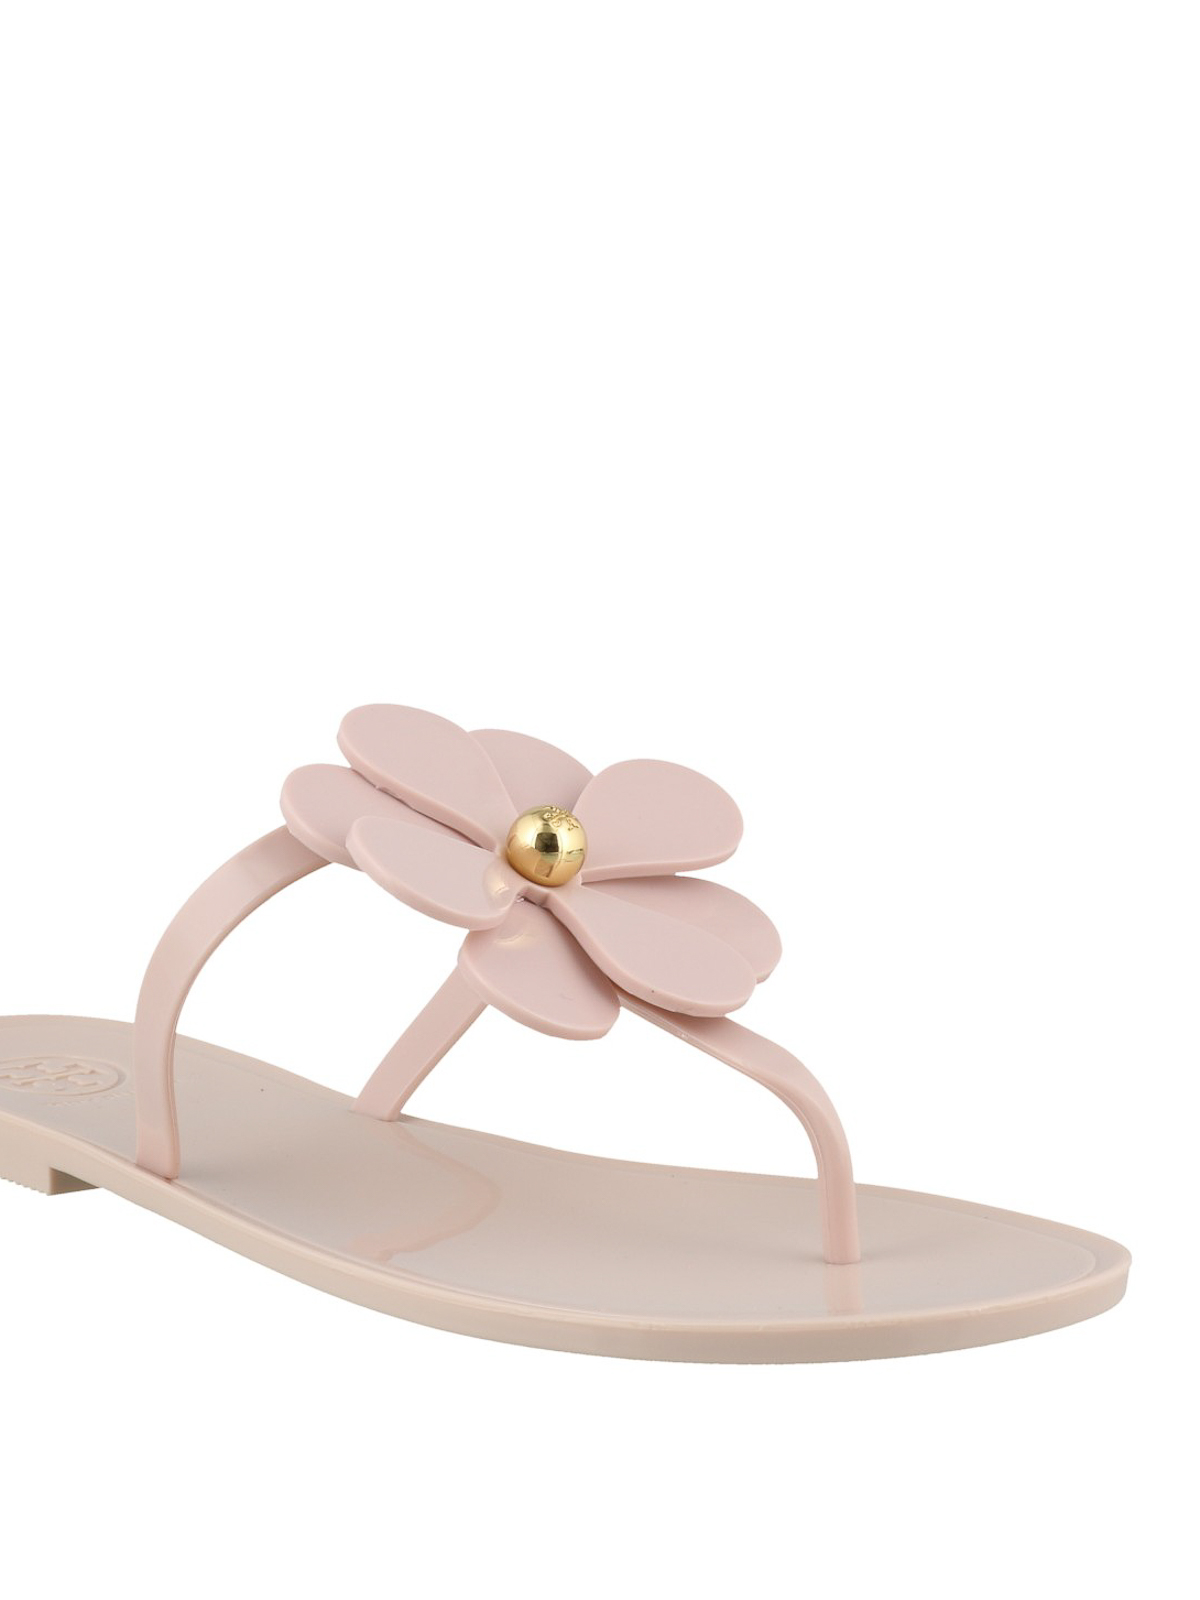 Tory Burch Blossom Jelly Thong Sandals in Pink